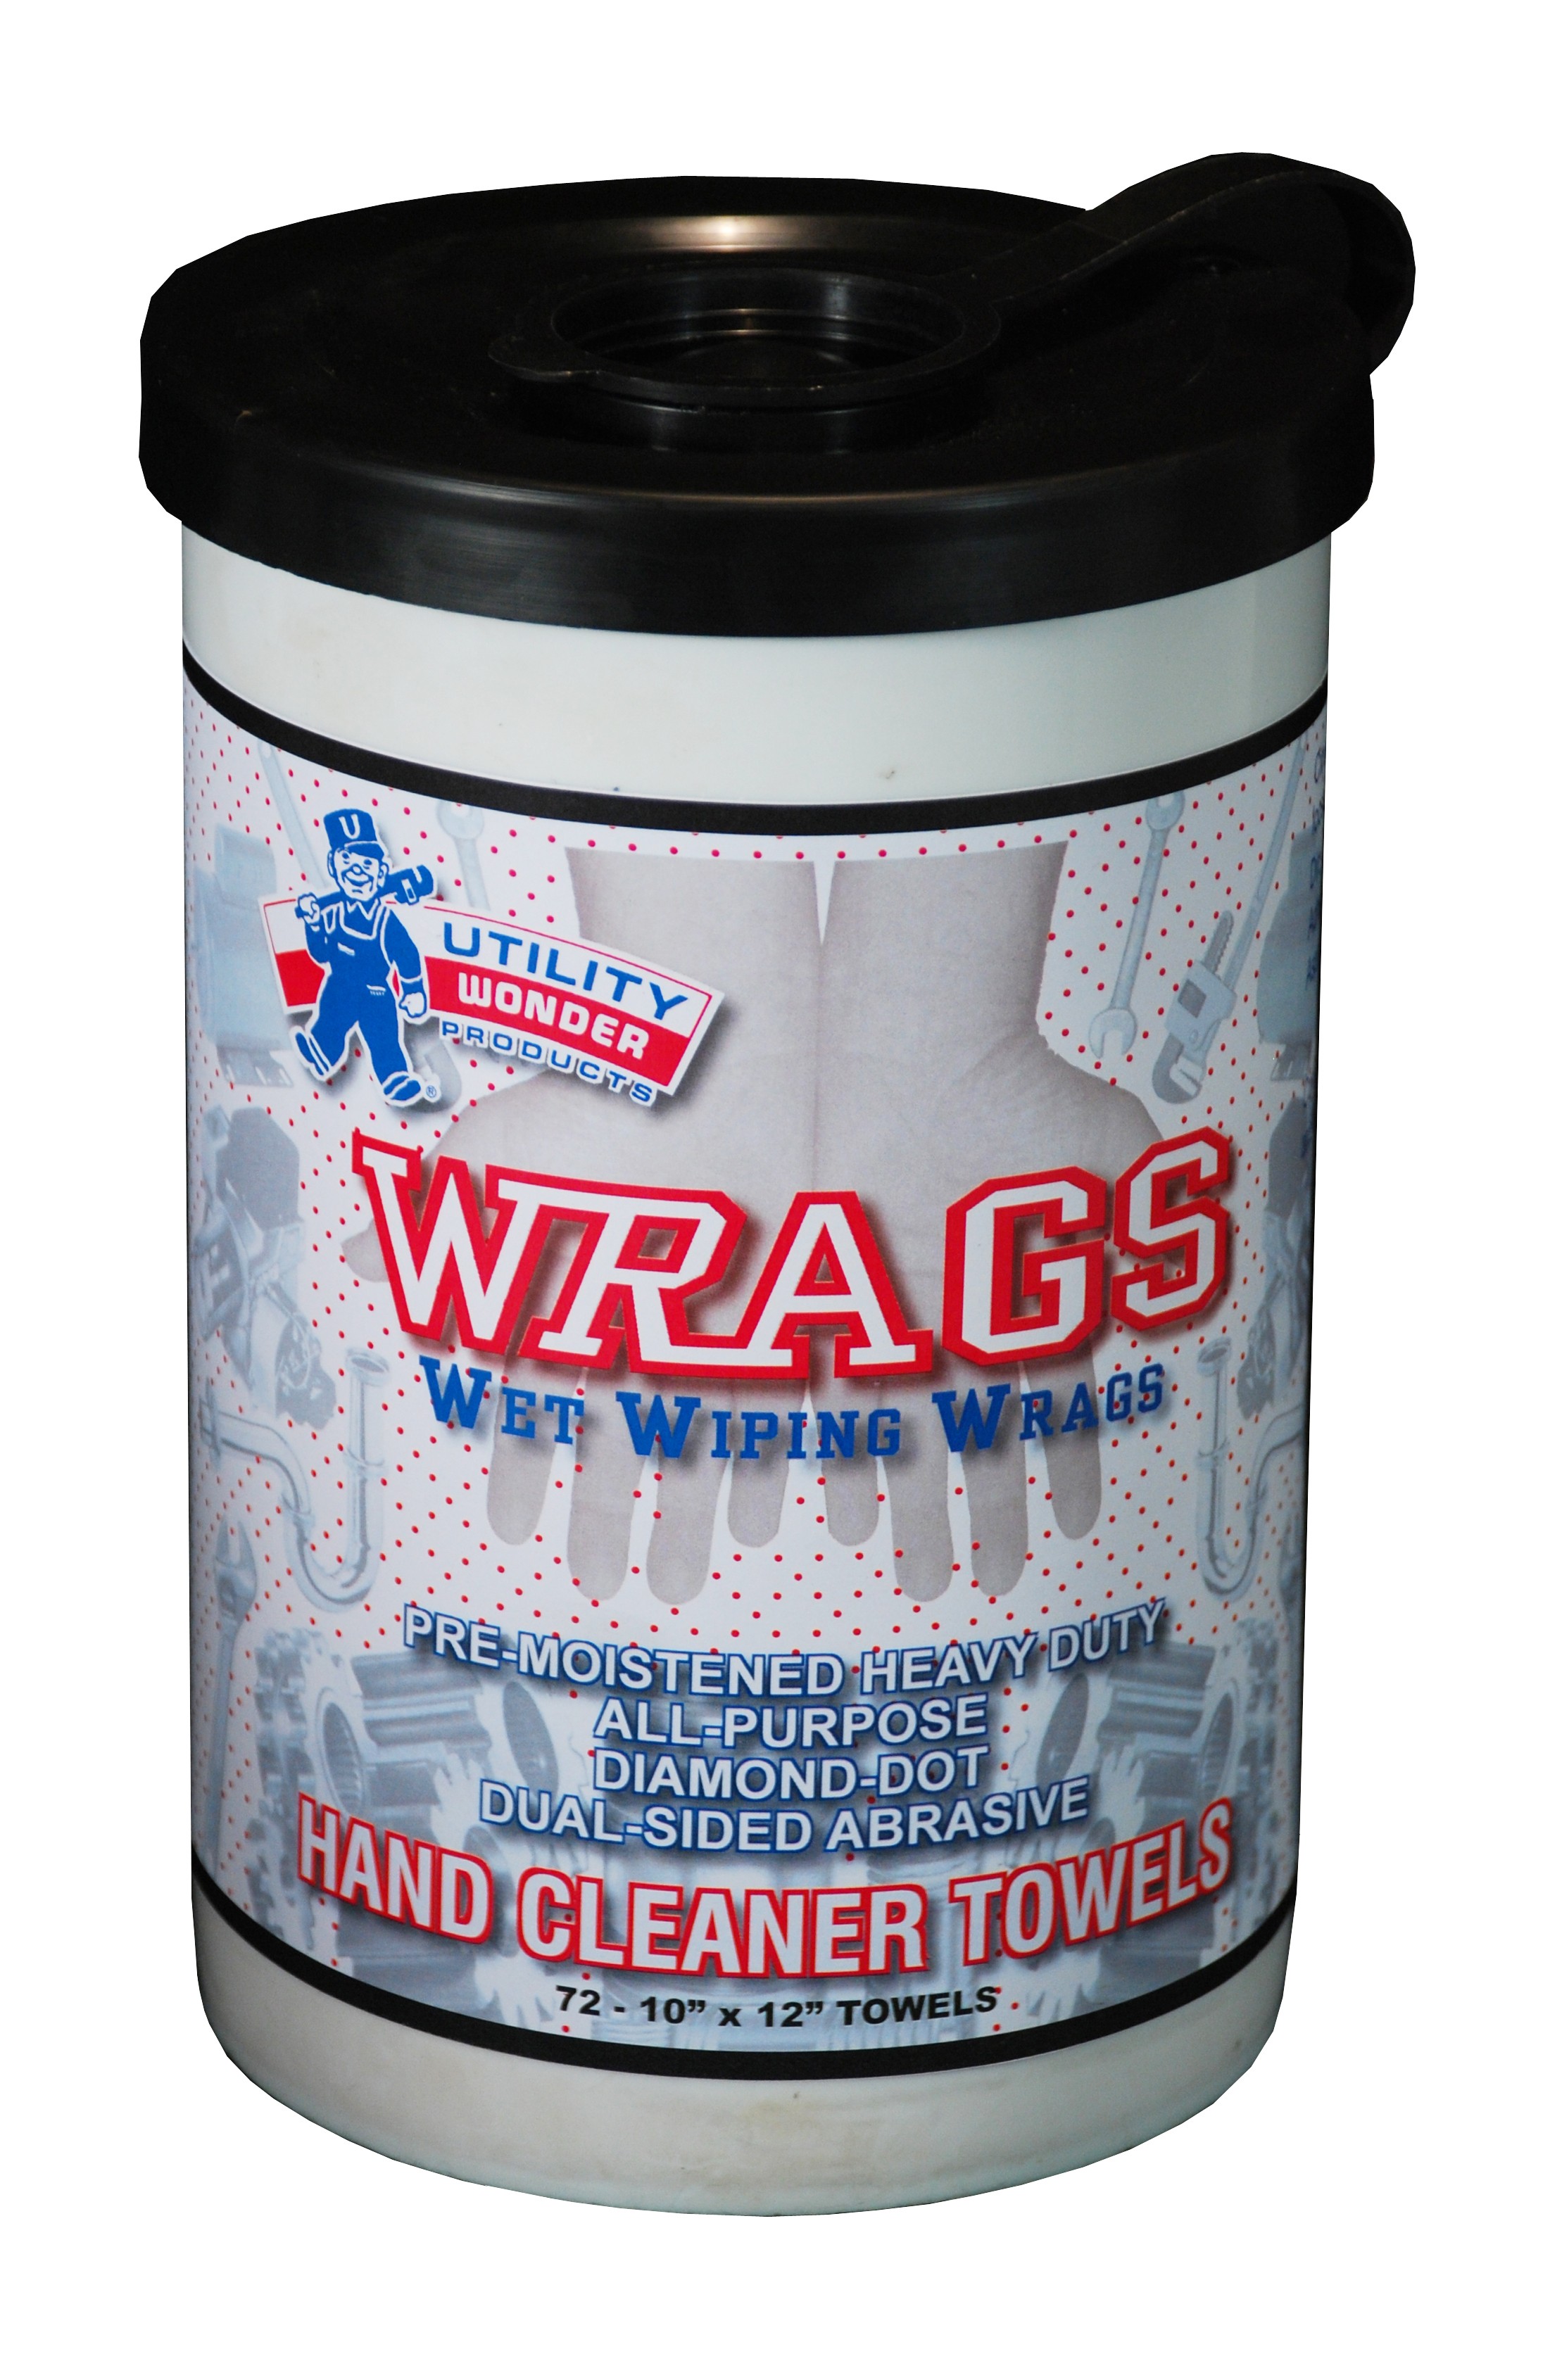 WRAGS WET WIPING TOWELS